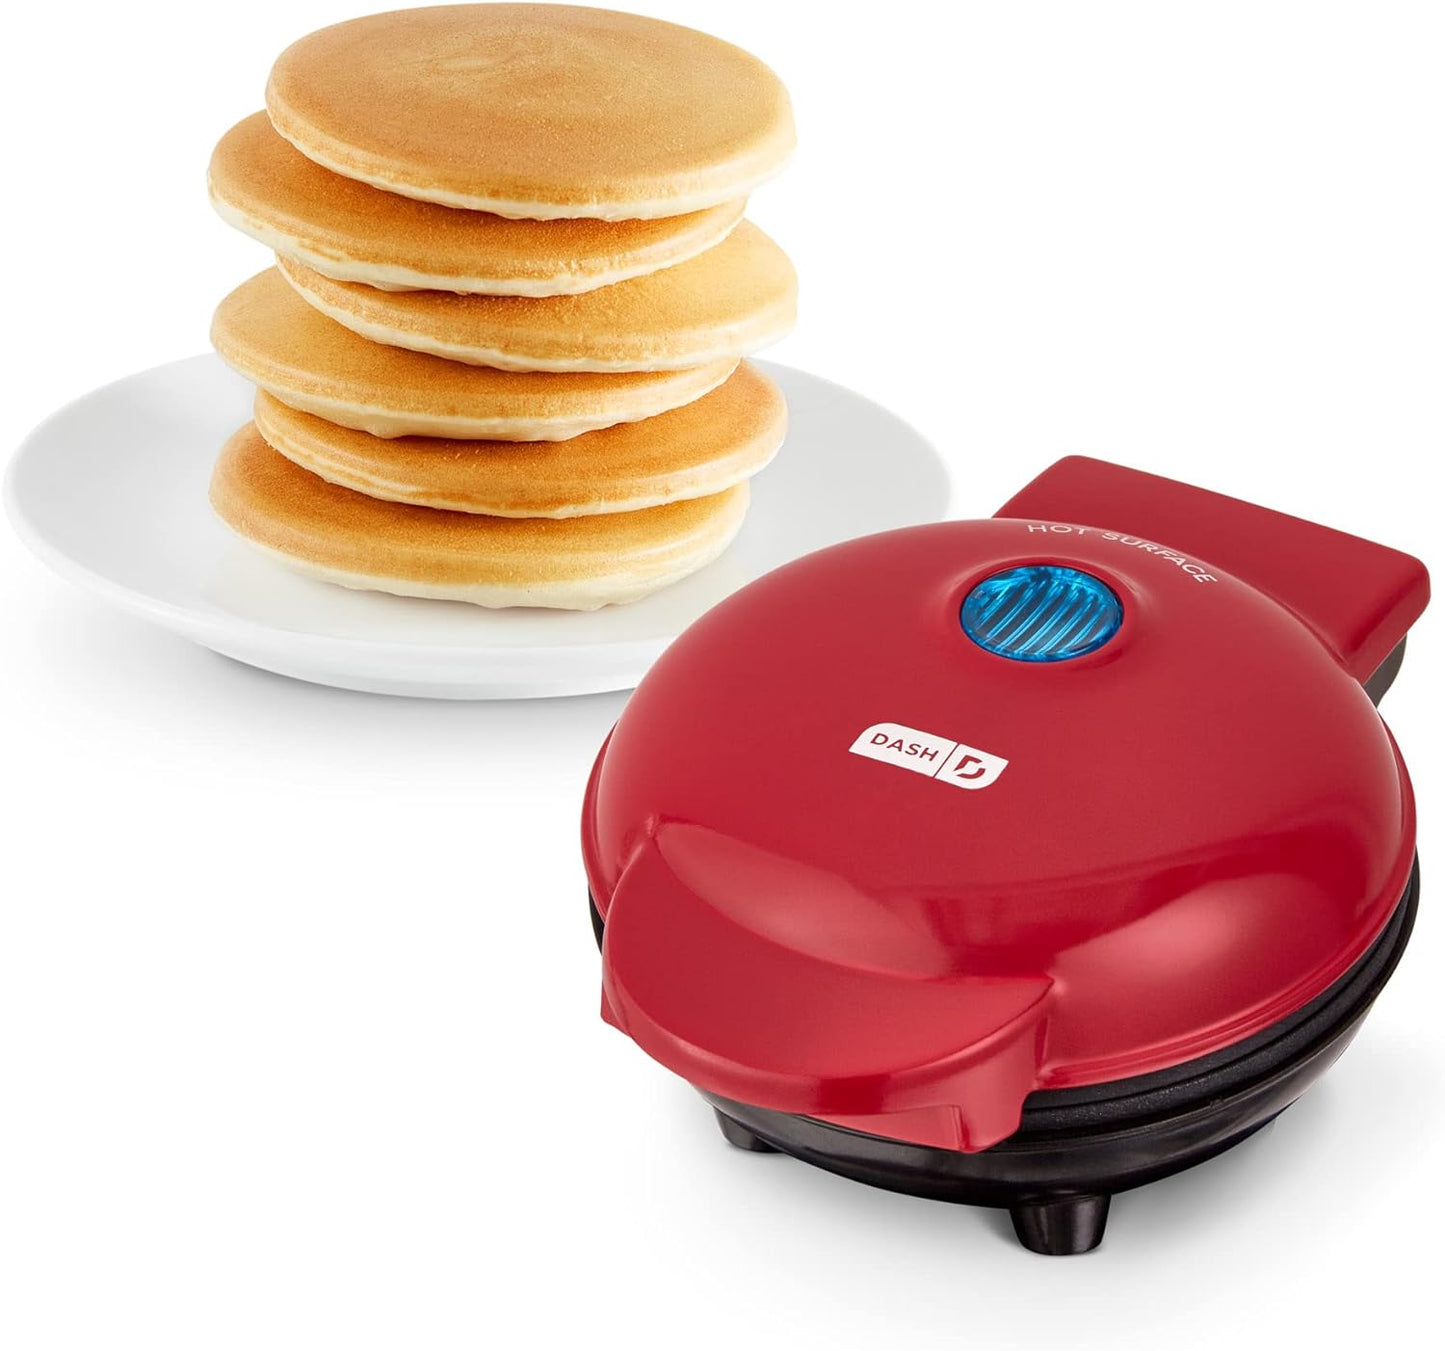 Mini Maker Electric Round Griddle for Individual Pancakes, Cookies, Eggs